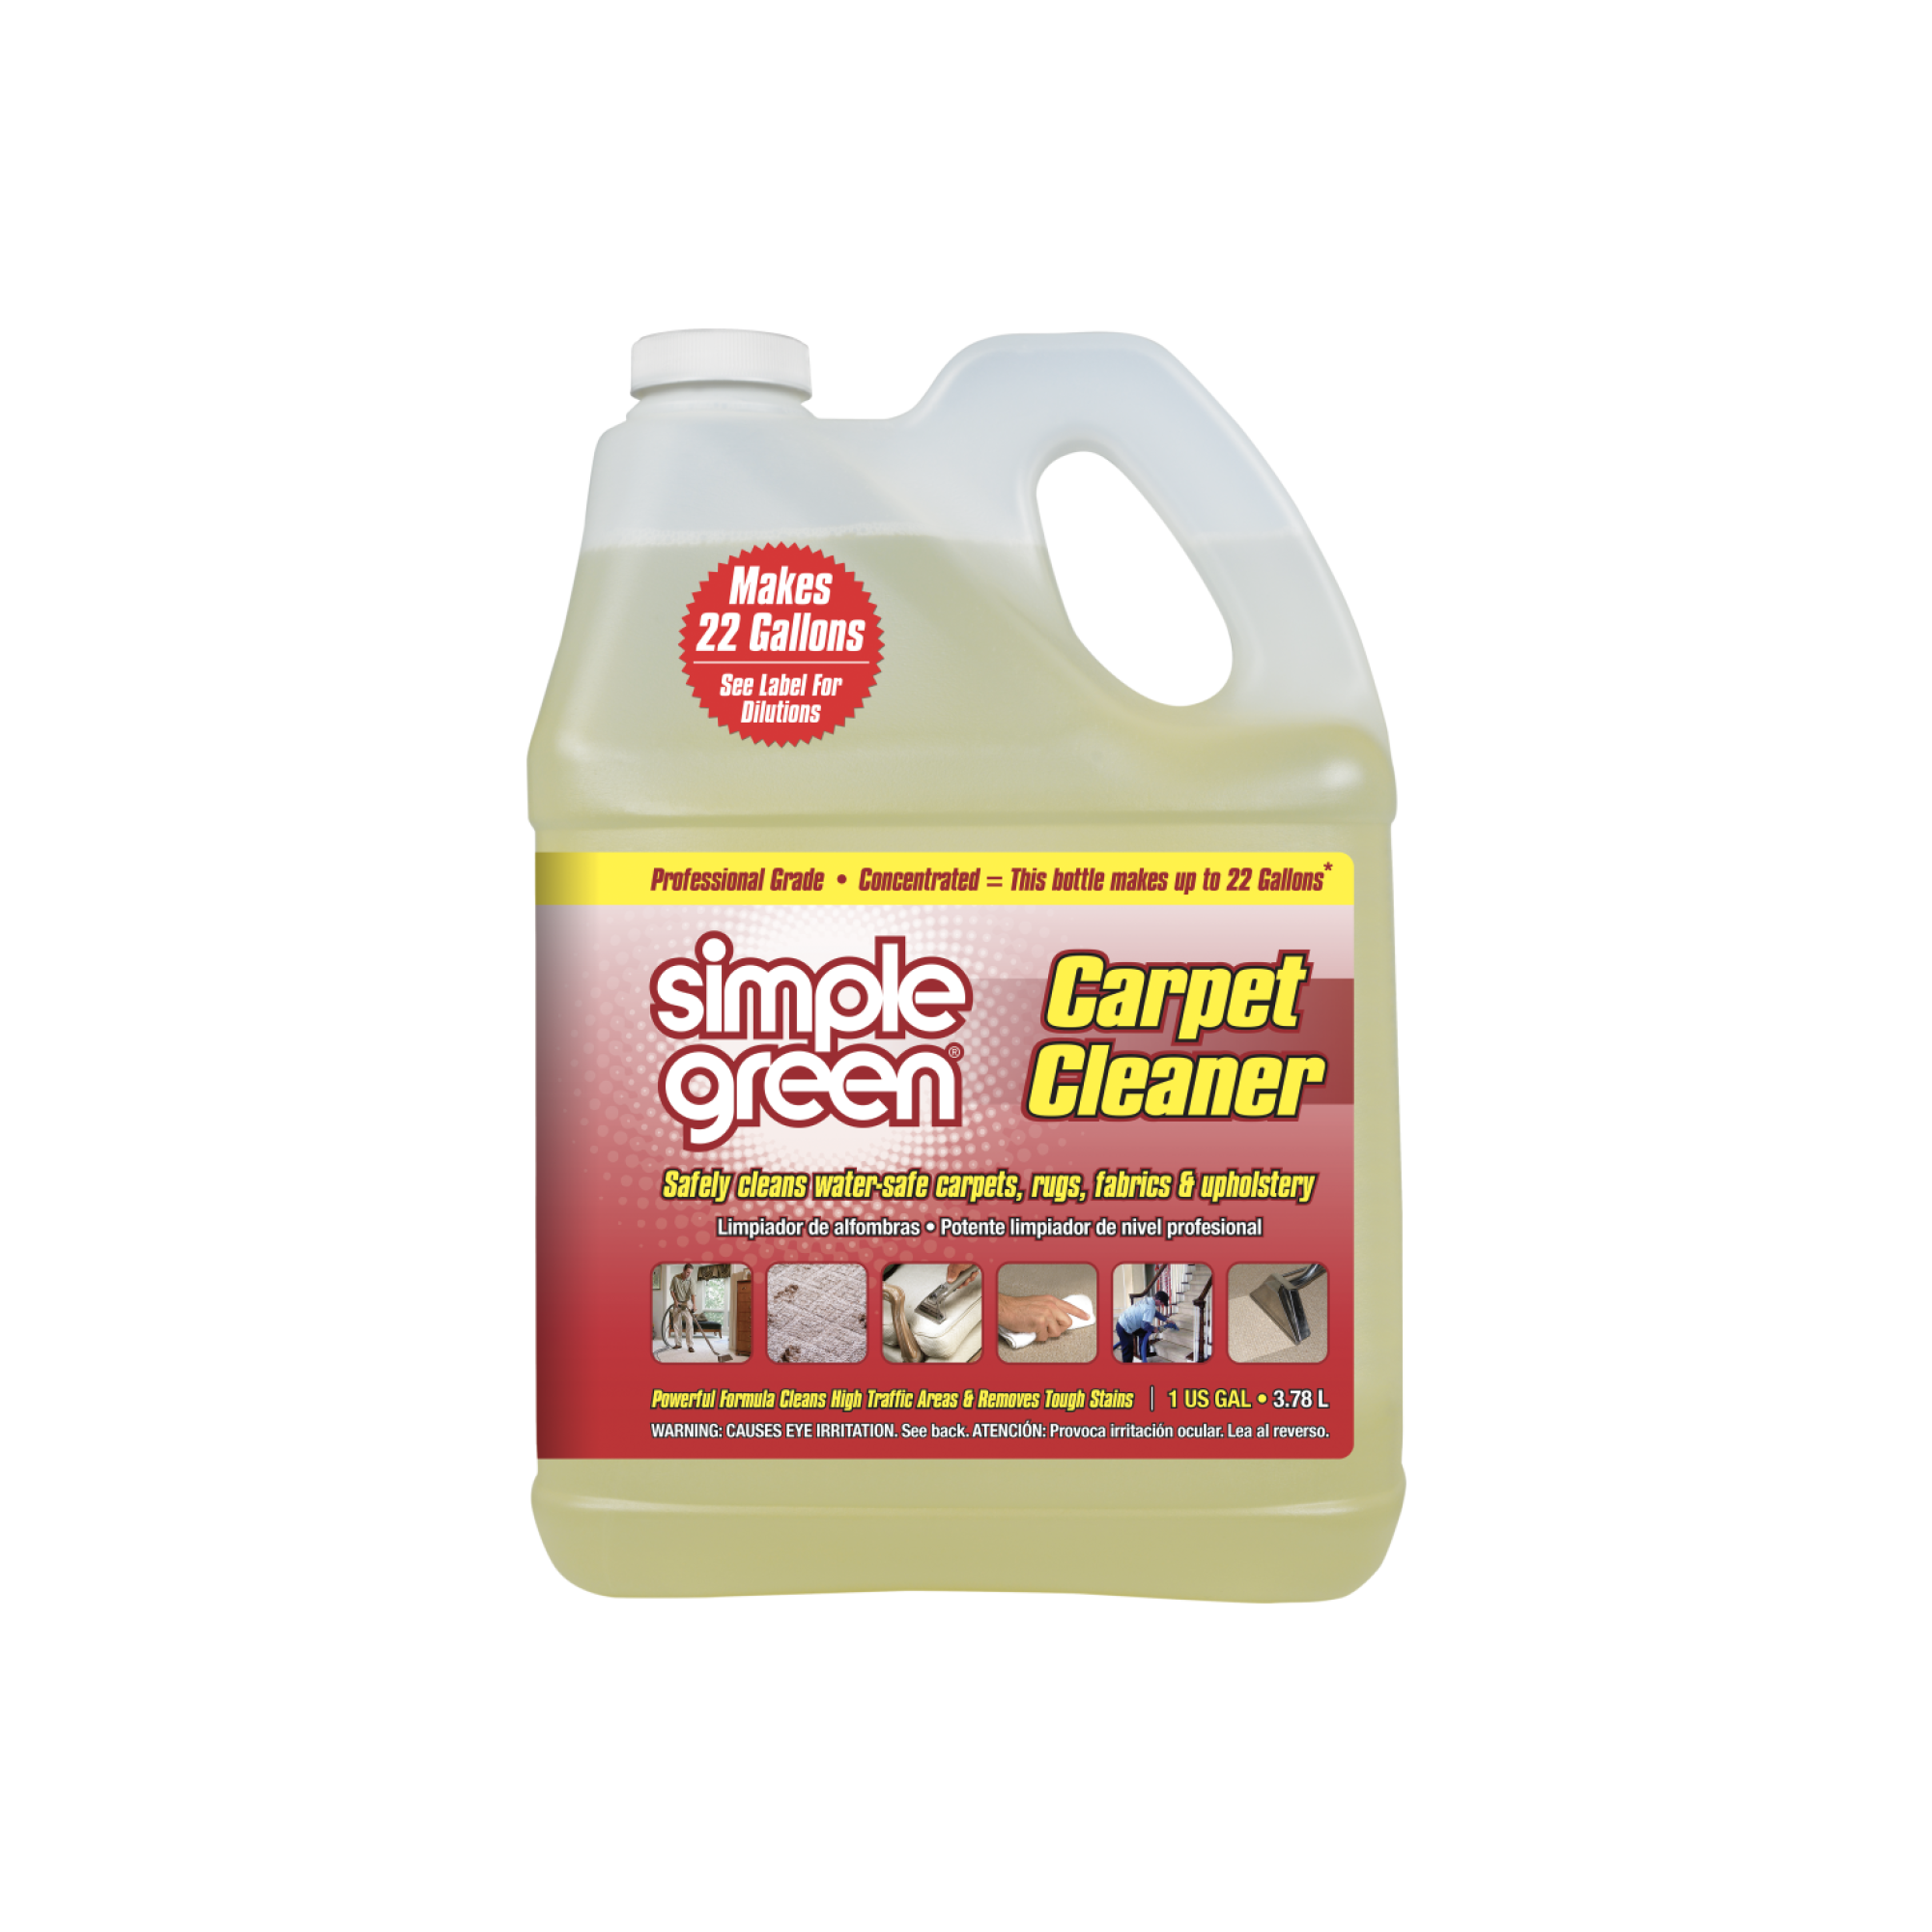  Simple Green 13014 67 All Purpose Cleaner, Green, 67.6